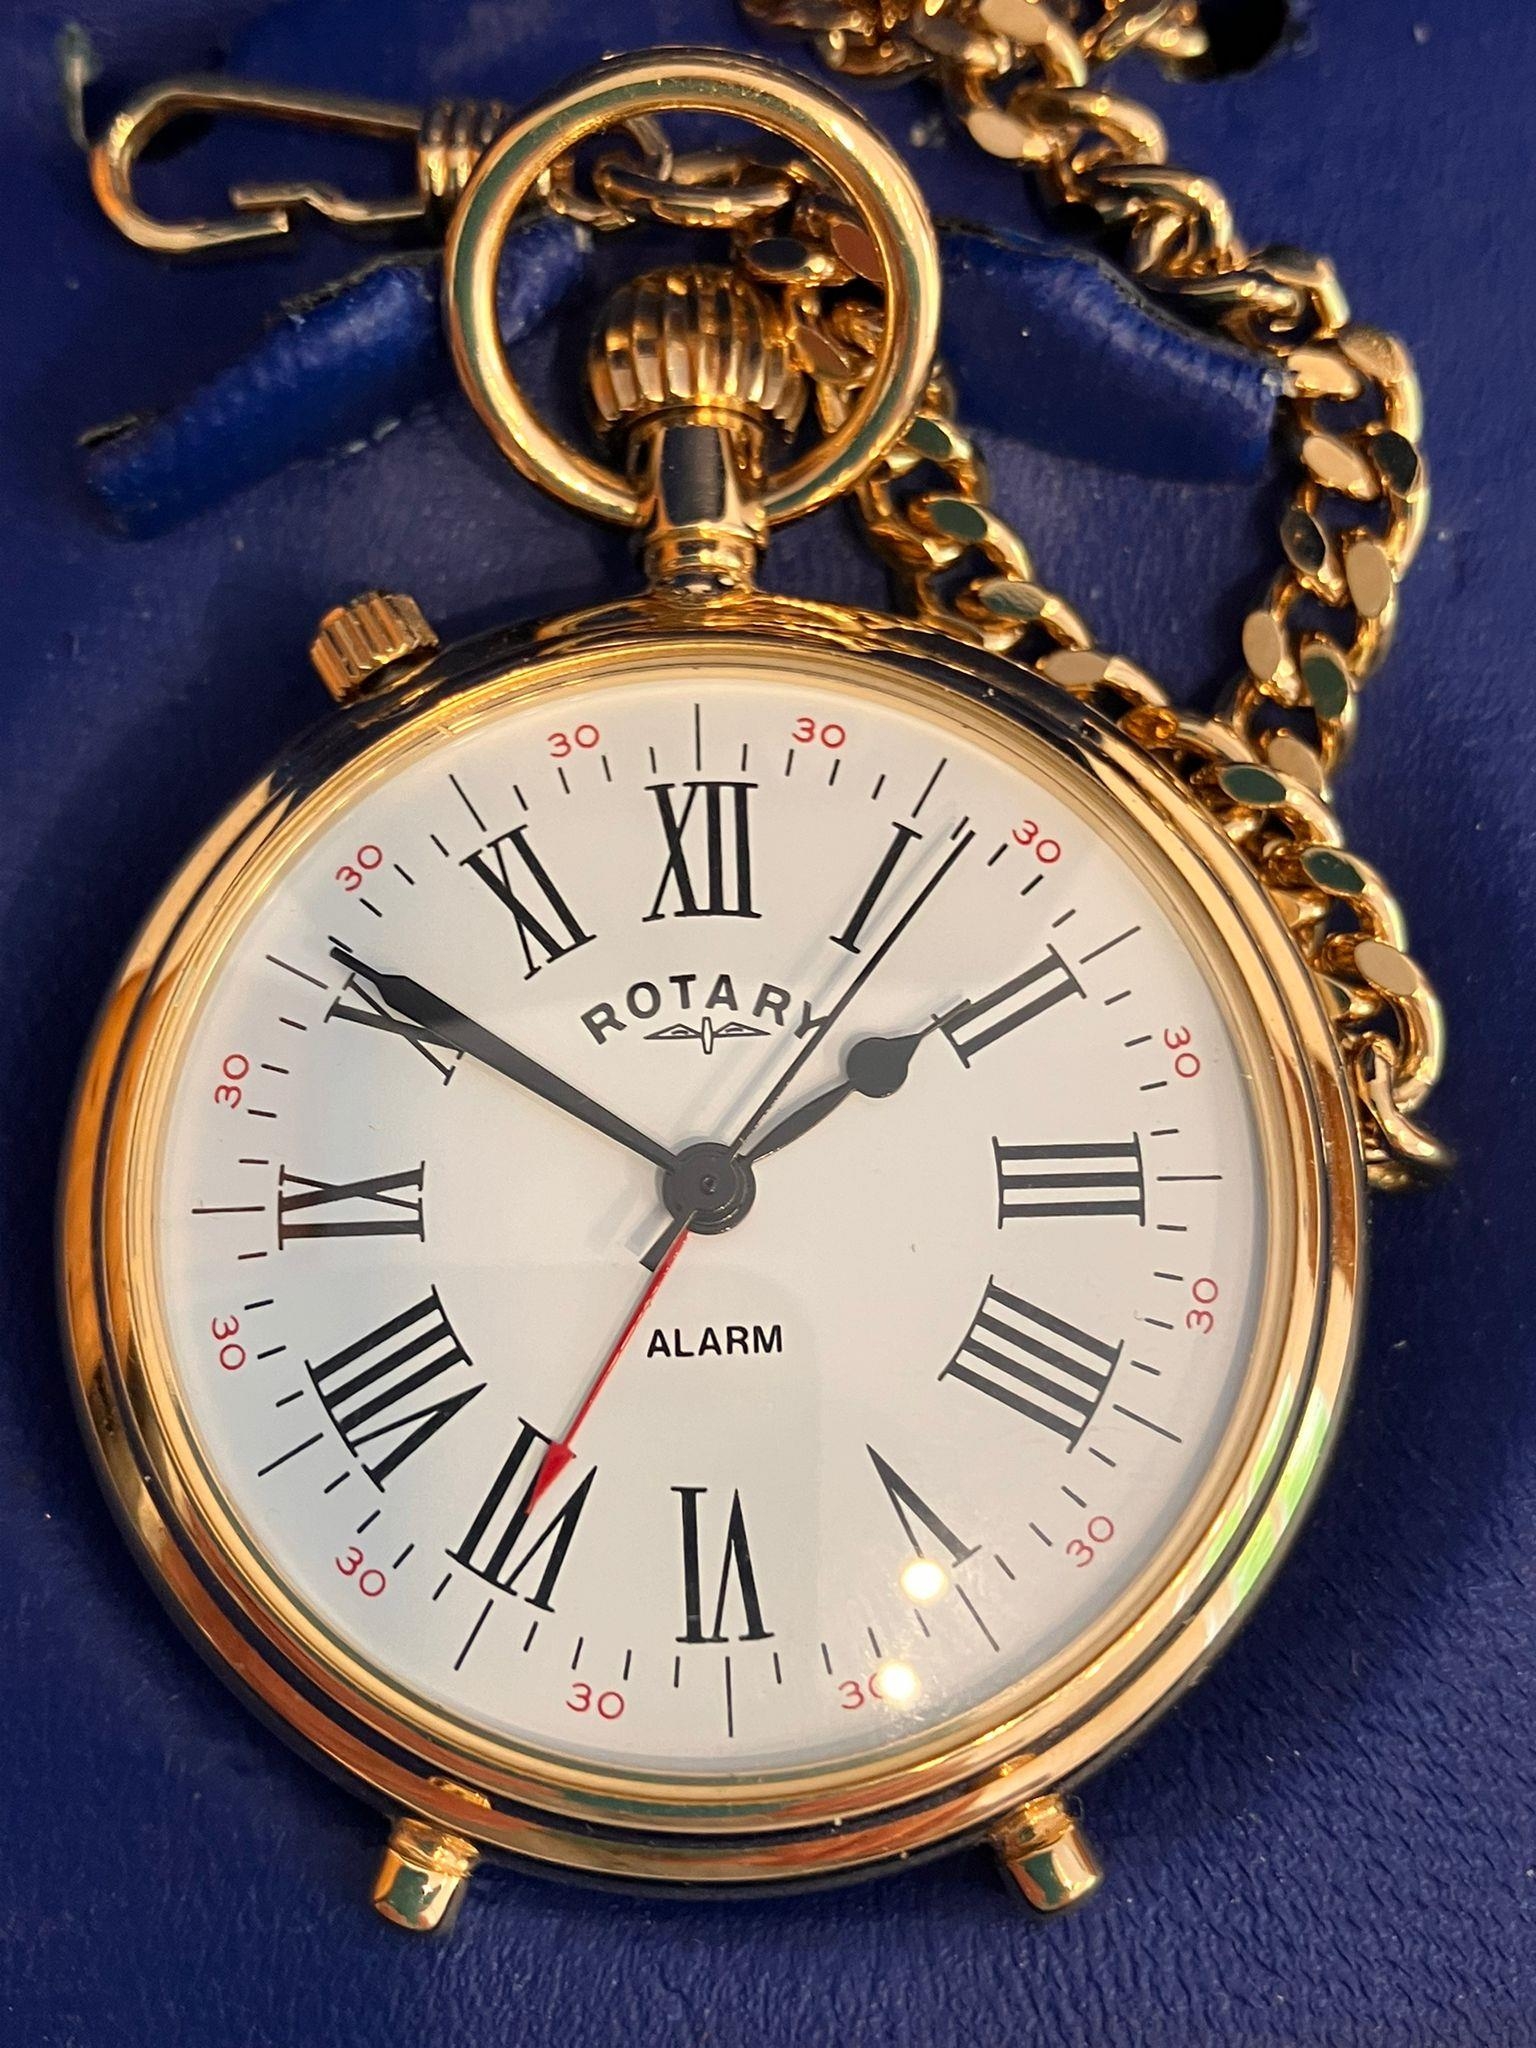 ROTARY POCKET WATCH with ALARM. Finished in Gold Tone with matching Chain. Complete with original - Image 2 of 4